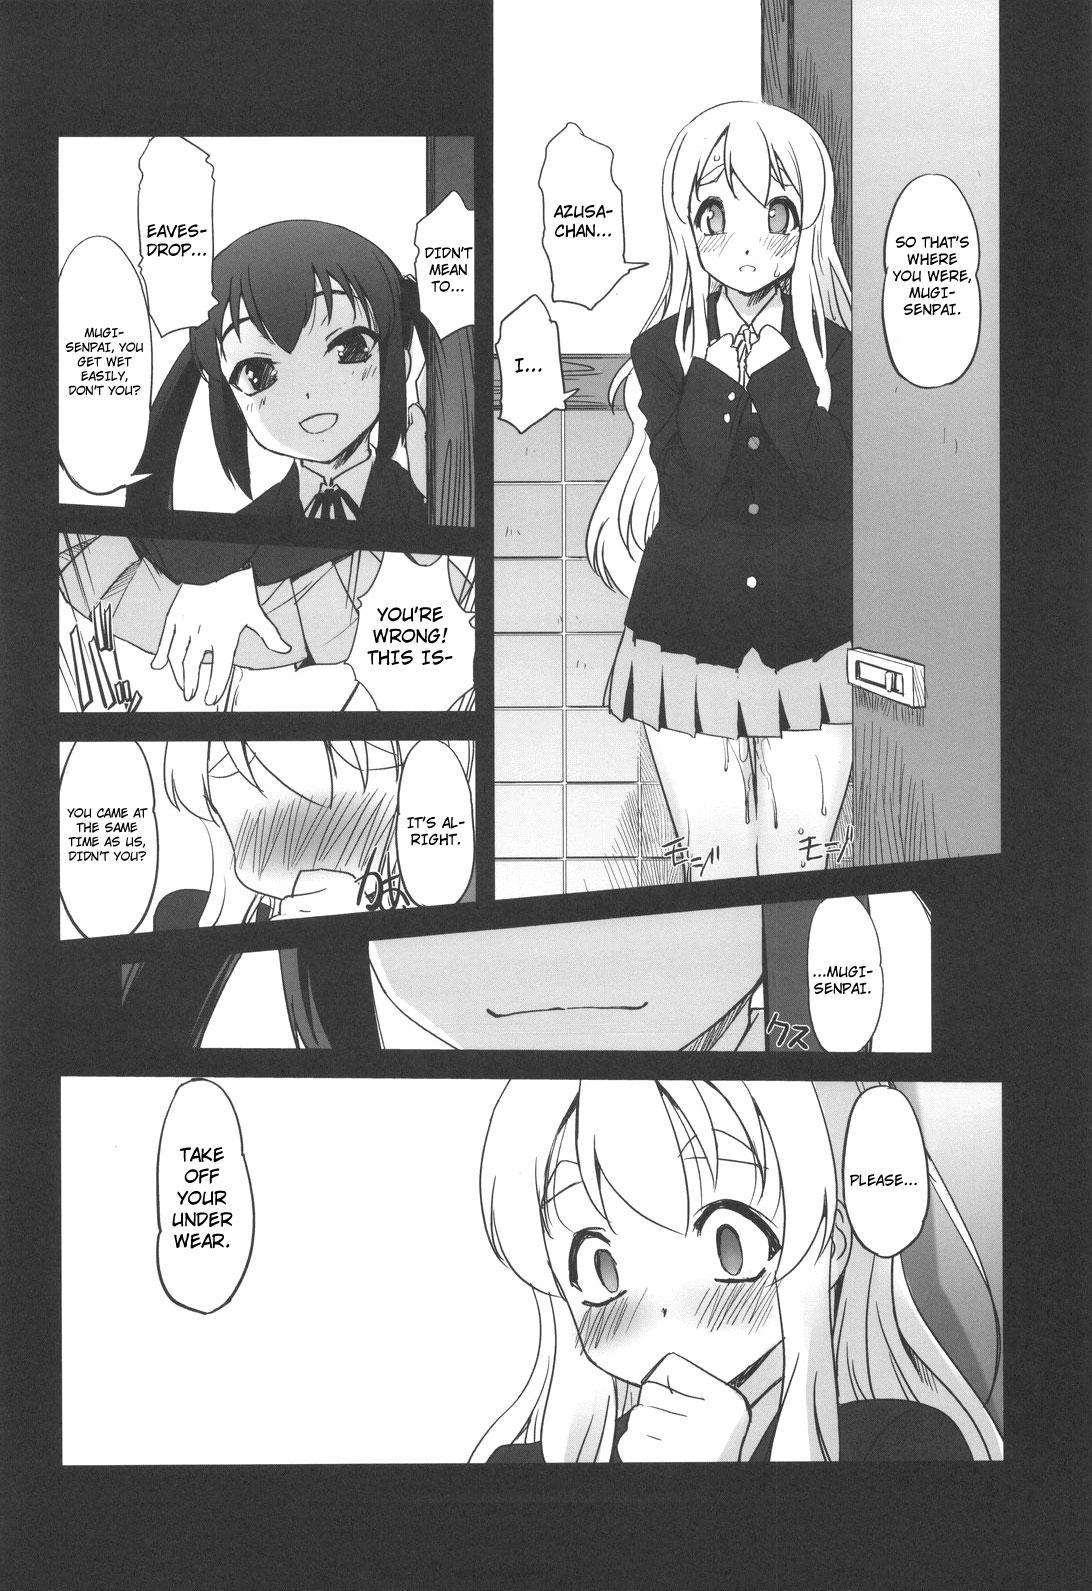 Nekomimi to Toilet to Houkago no Bushitsu | Cat Ears And A Restroom And The Club Room After School 16